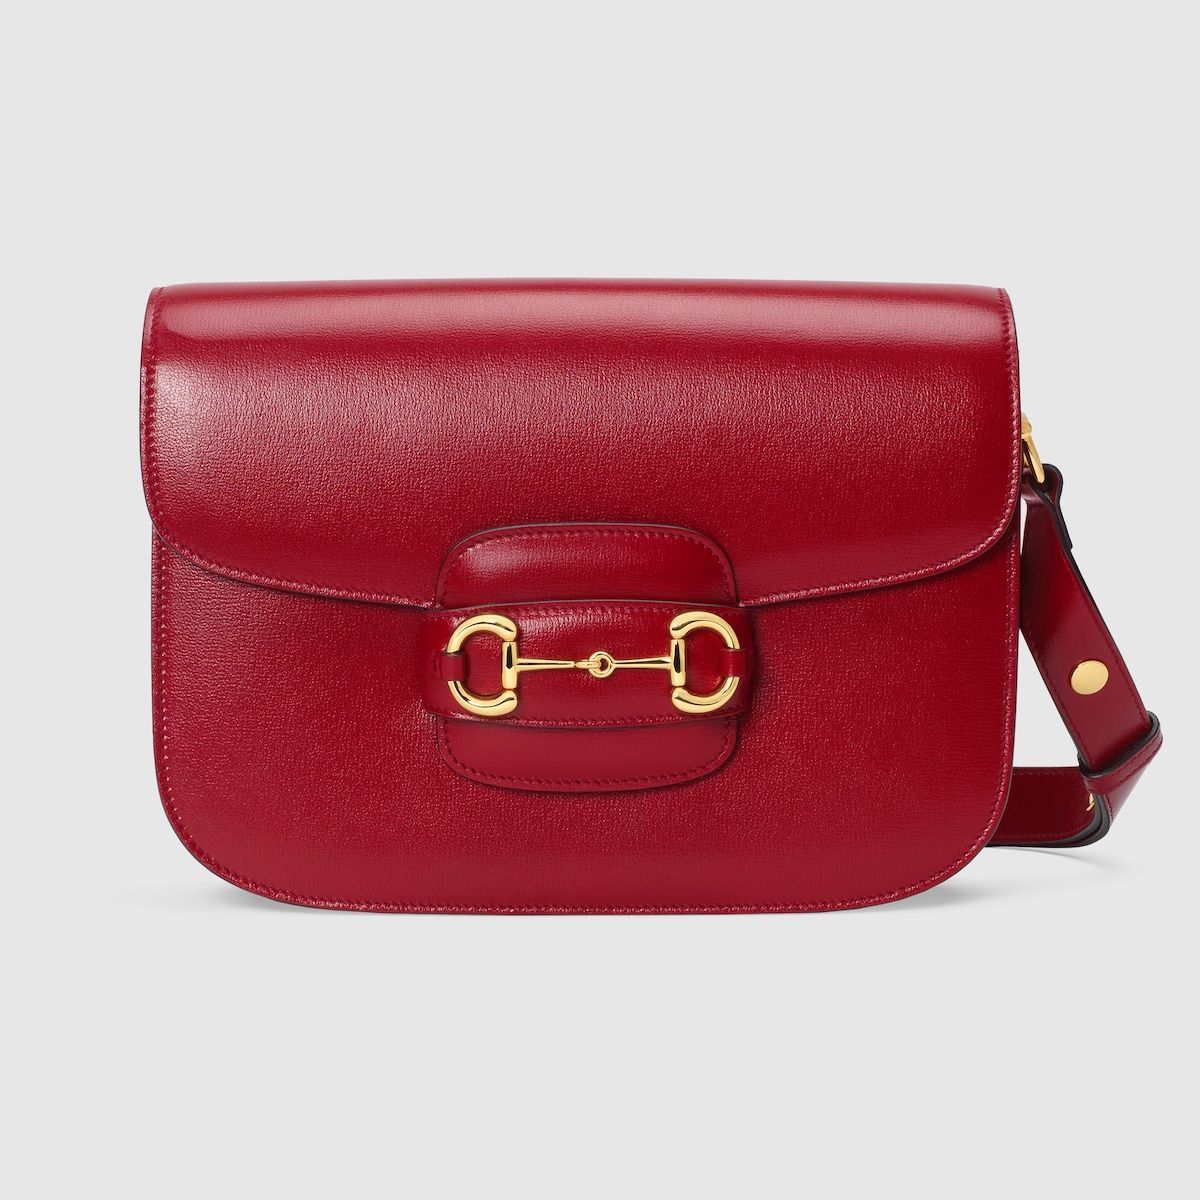 40 designer bags you can get for under $400 | Stylight